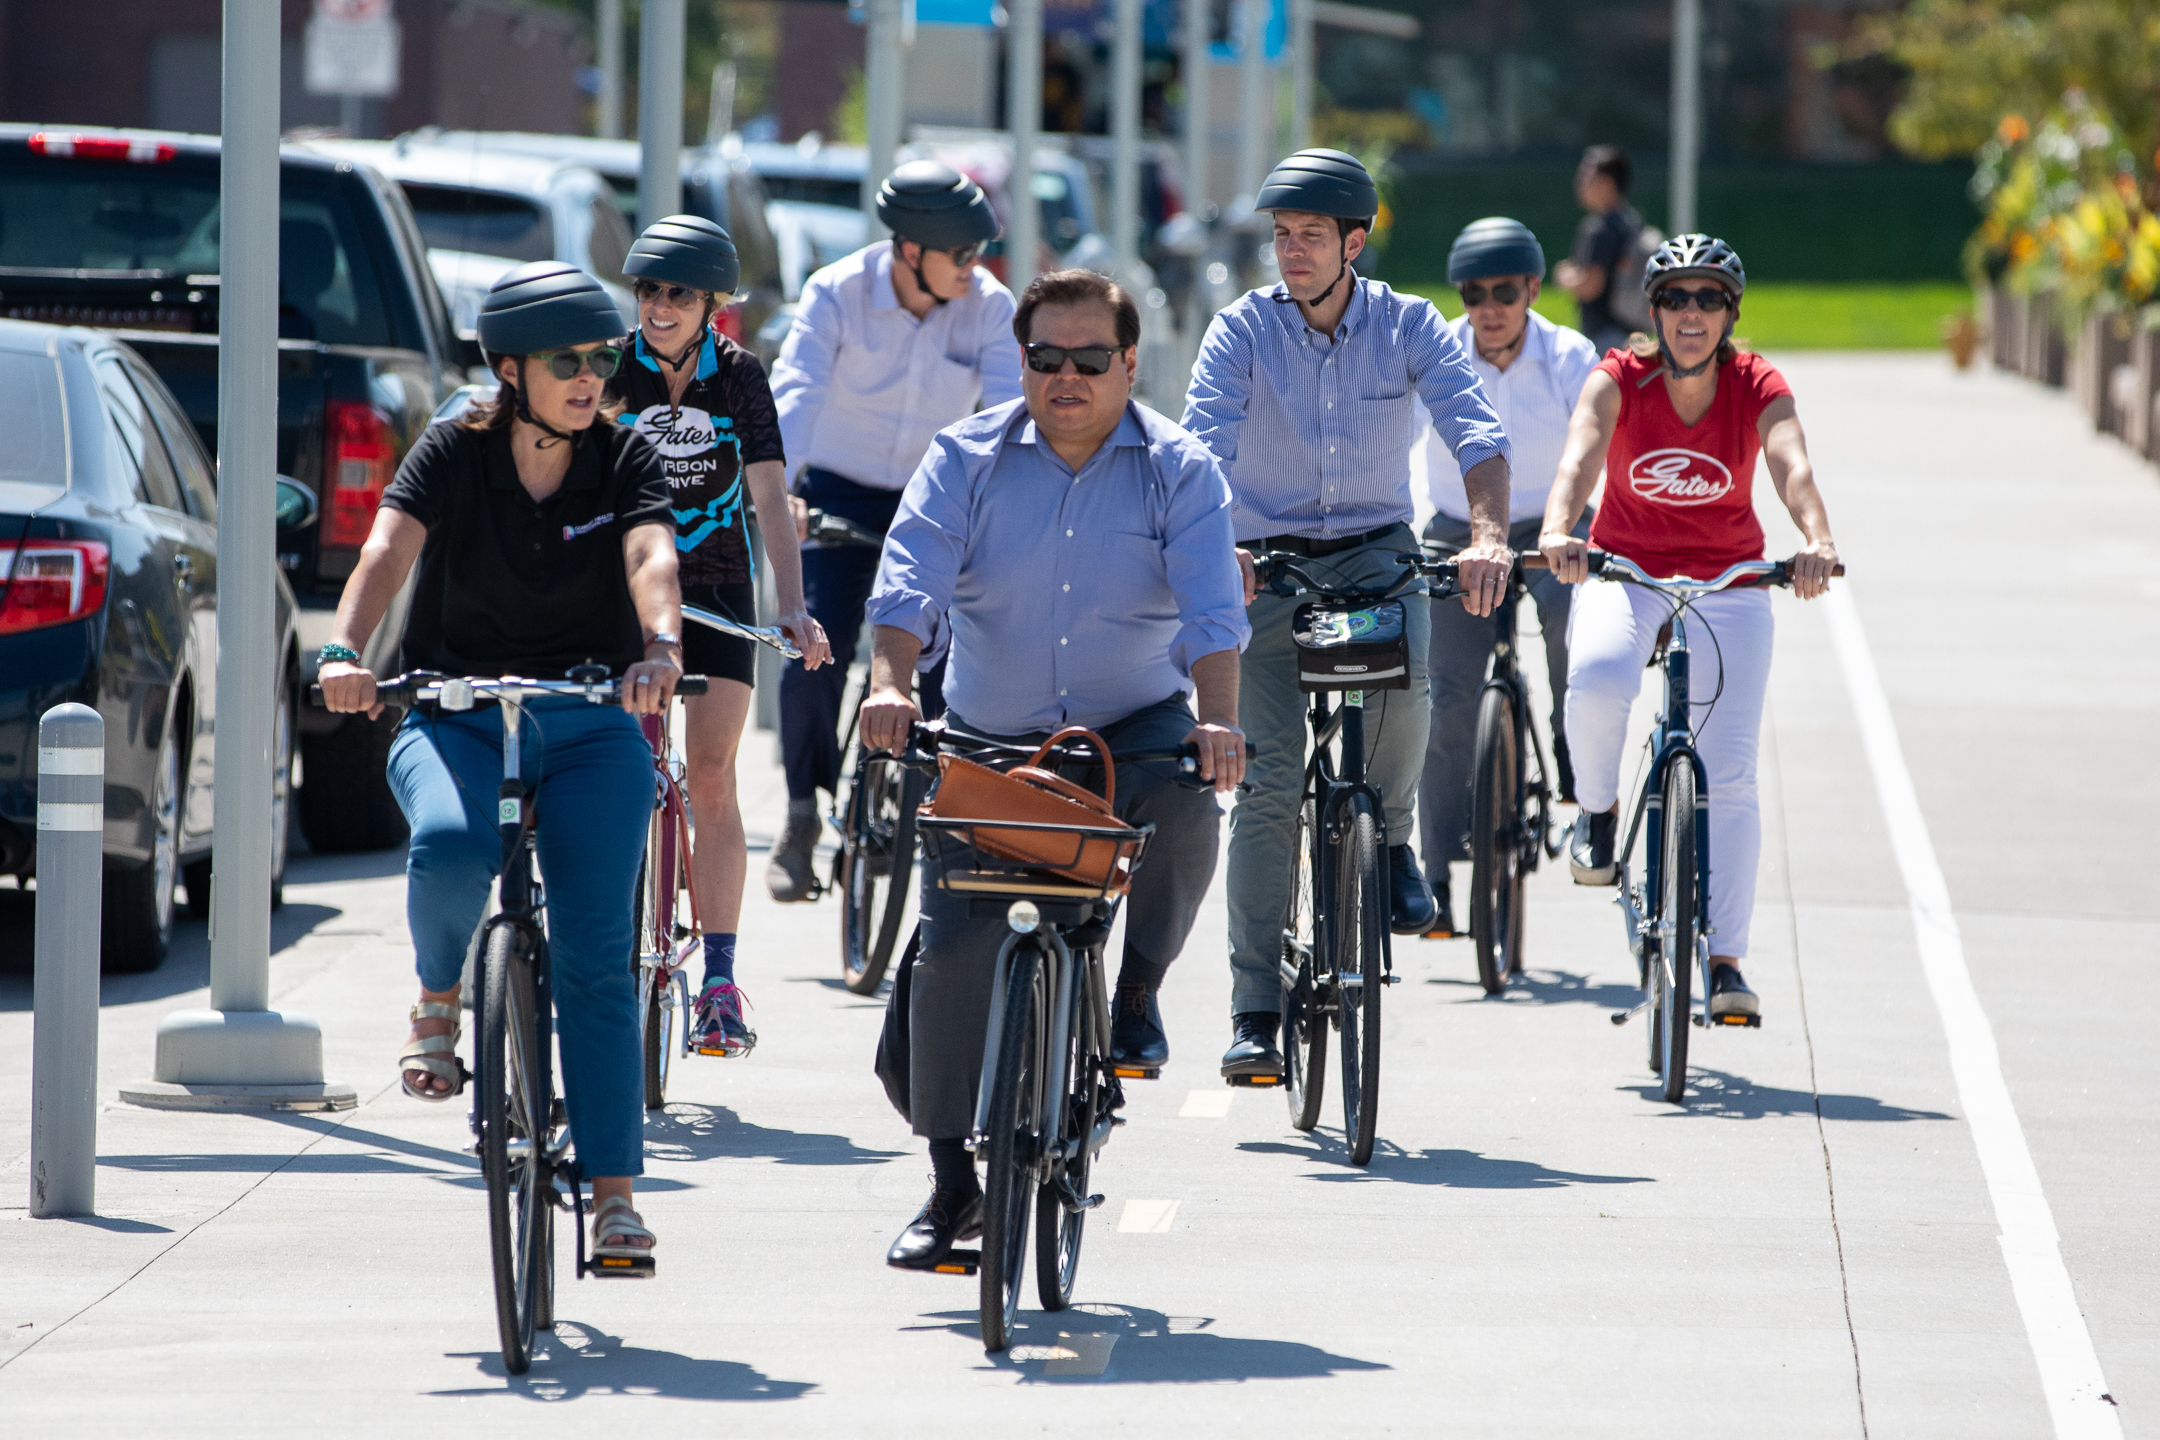 A group of officials ride along the 5.28 mile route that the 5280 Traill will follow following the press conference yesterday. Photo: Andy Bosselman